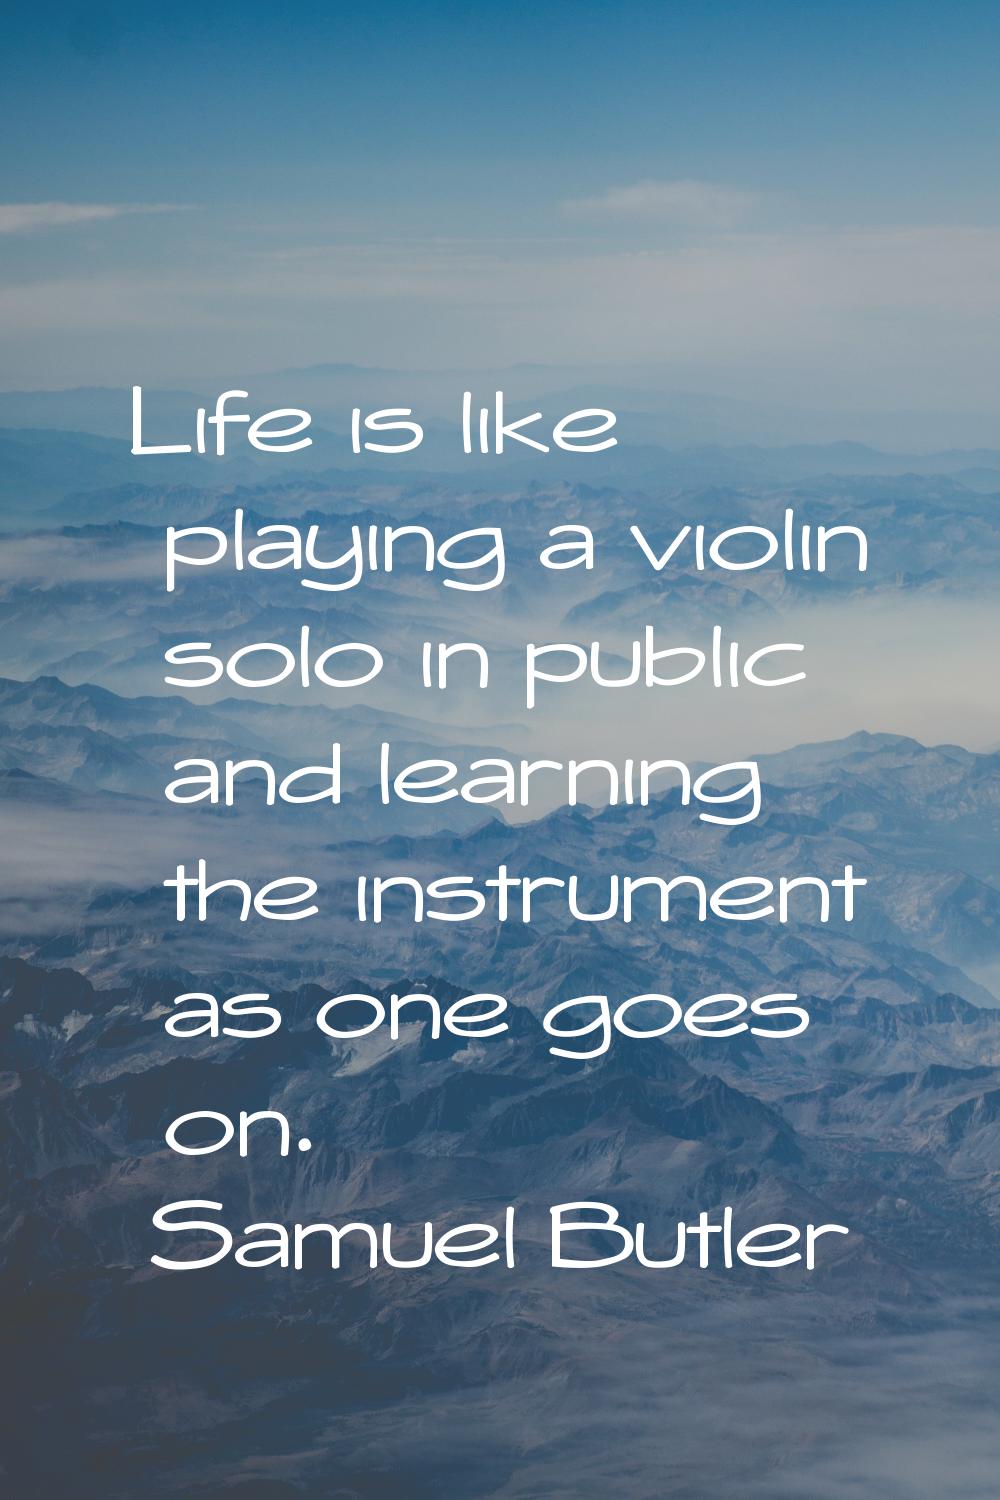 Life is like playing a violin solo in public and learning the instrument as one goes on.